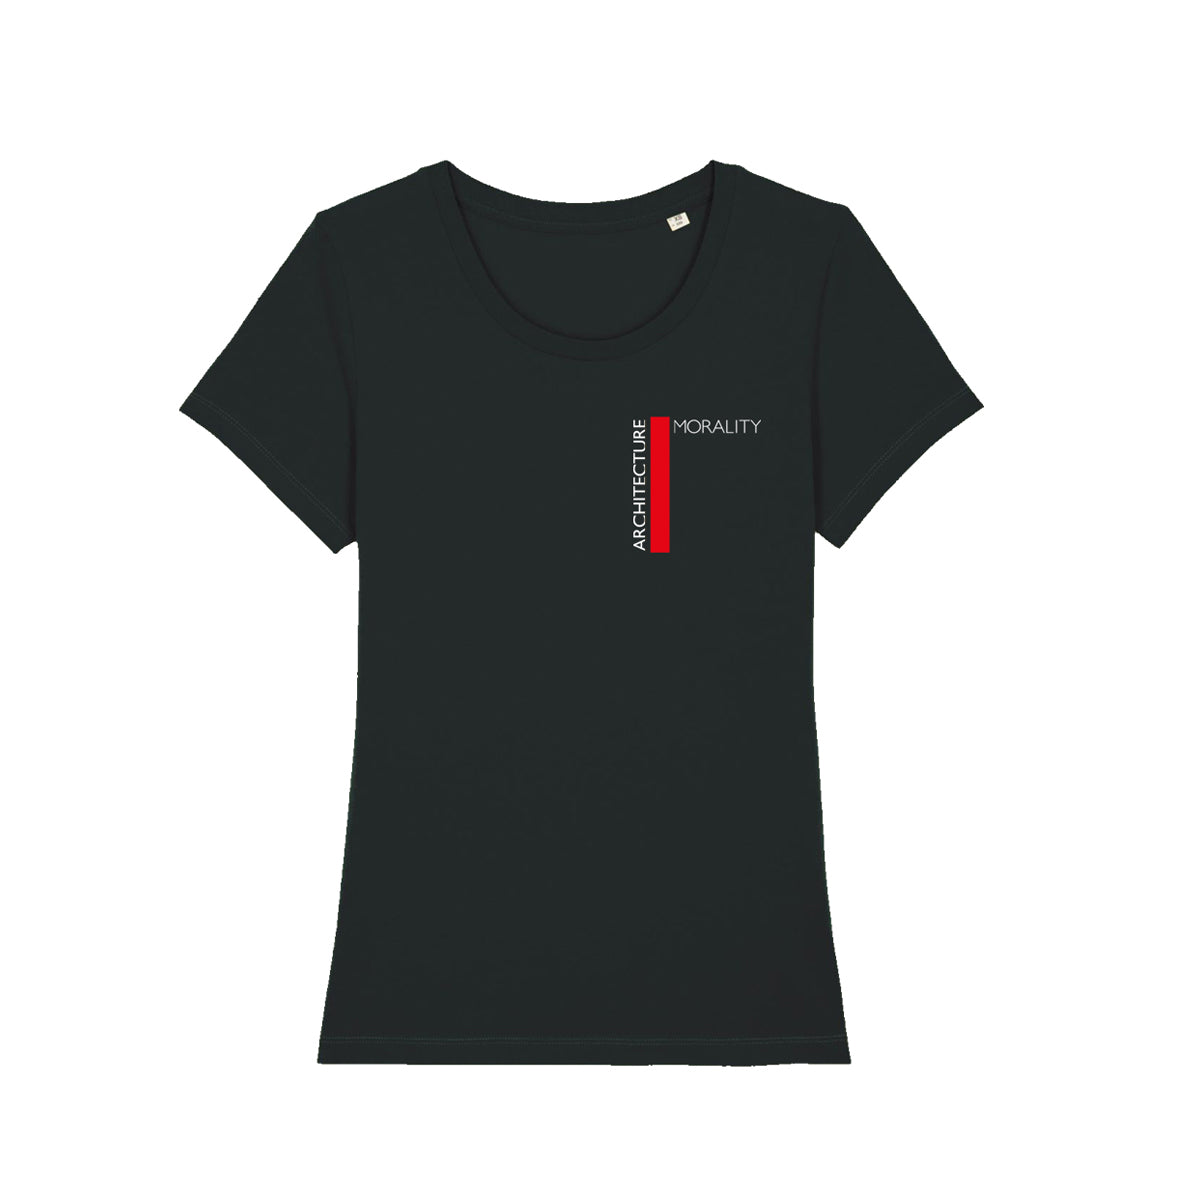 Architecture & Morality - T-shirt